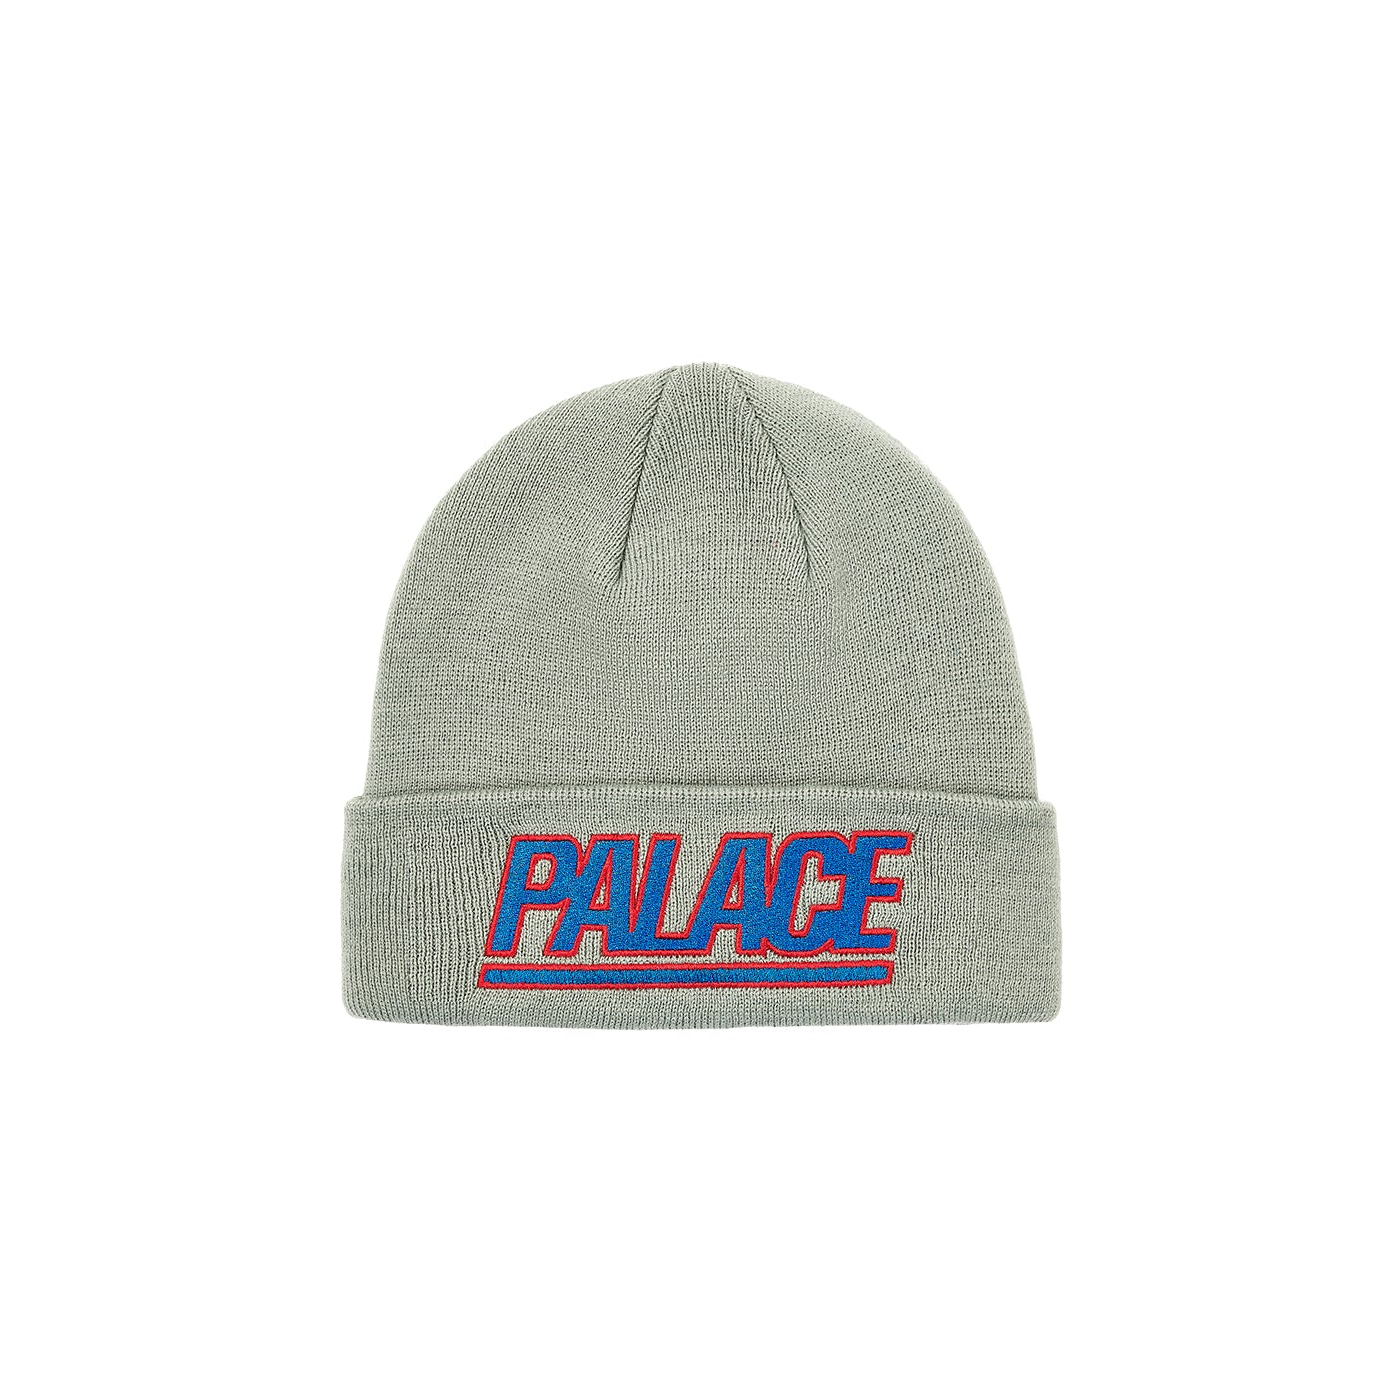 Thumbnail GIGANTIC BEANIE GREY one color